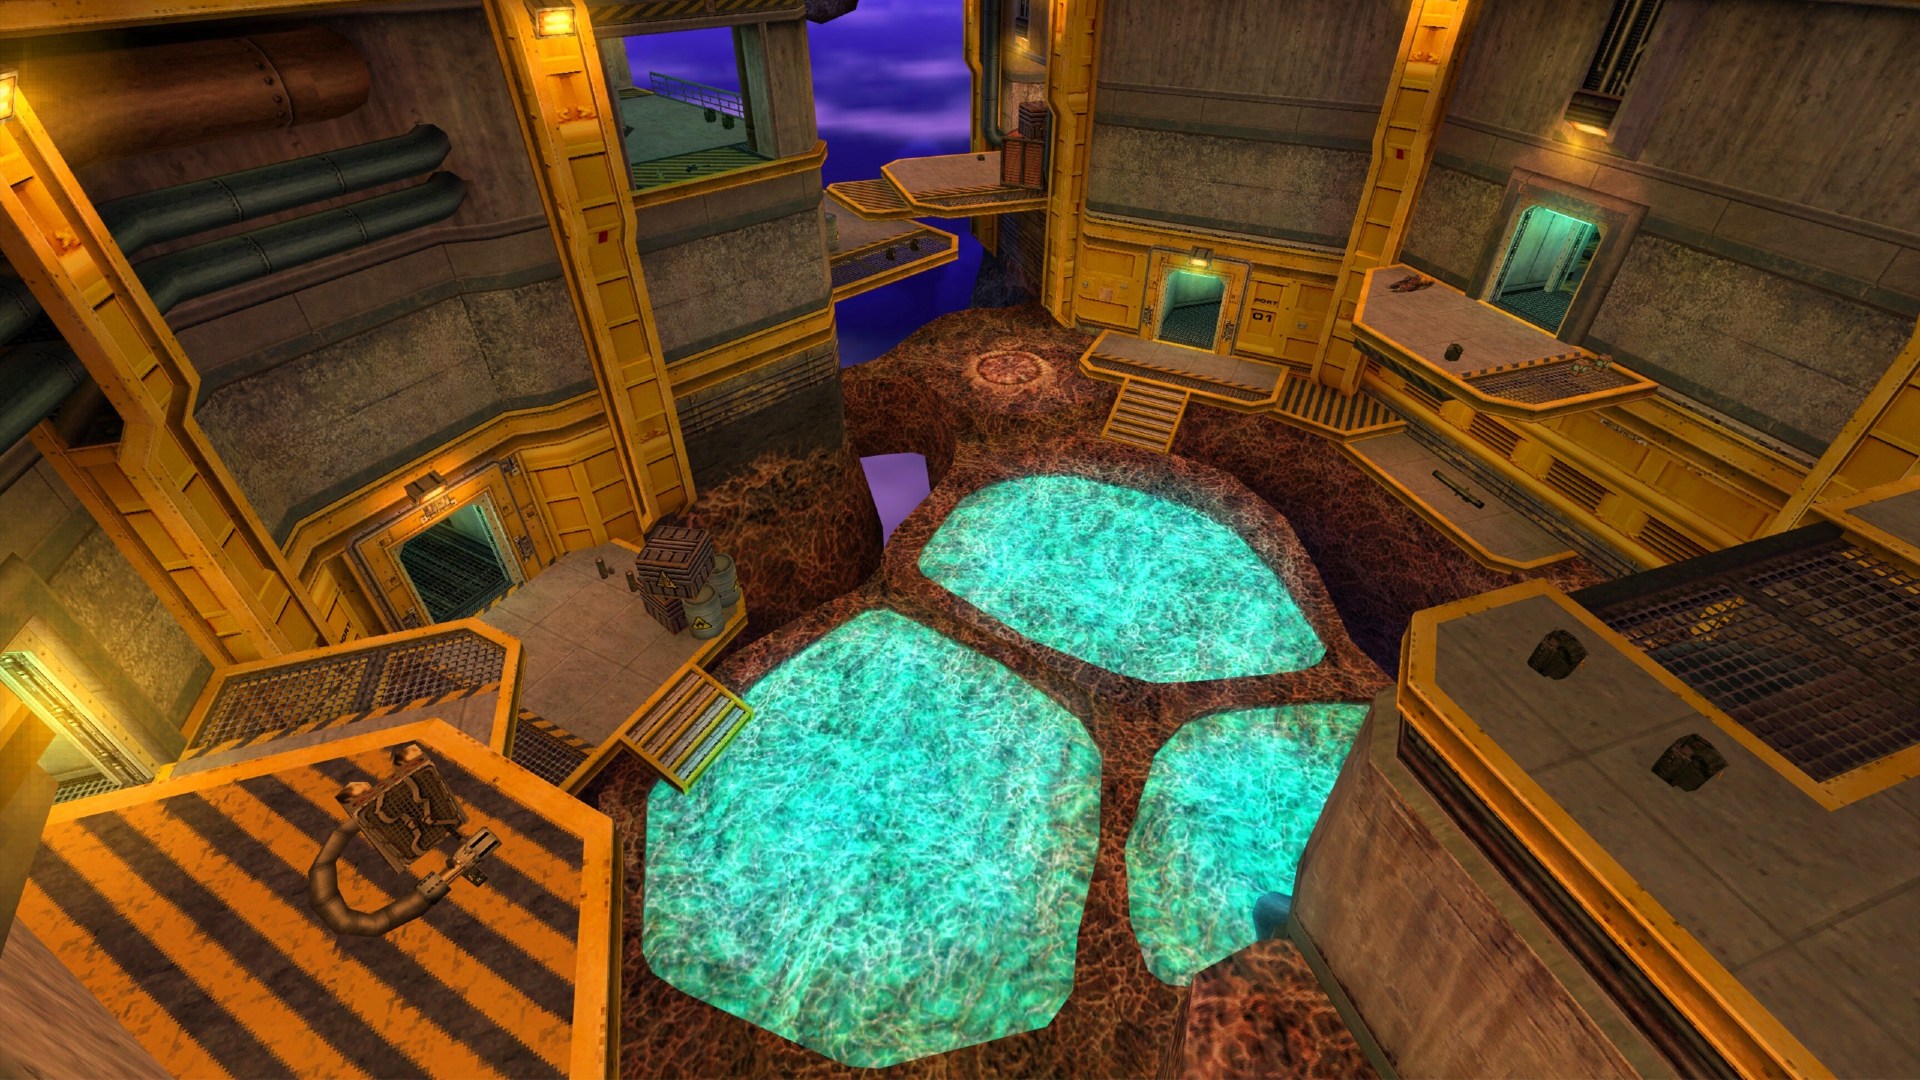 Half-Life pool party map showing the inside of a facility seemingly floating in a purple space